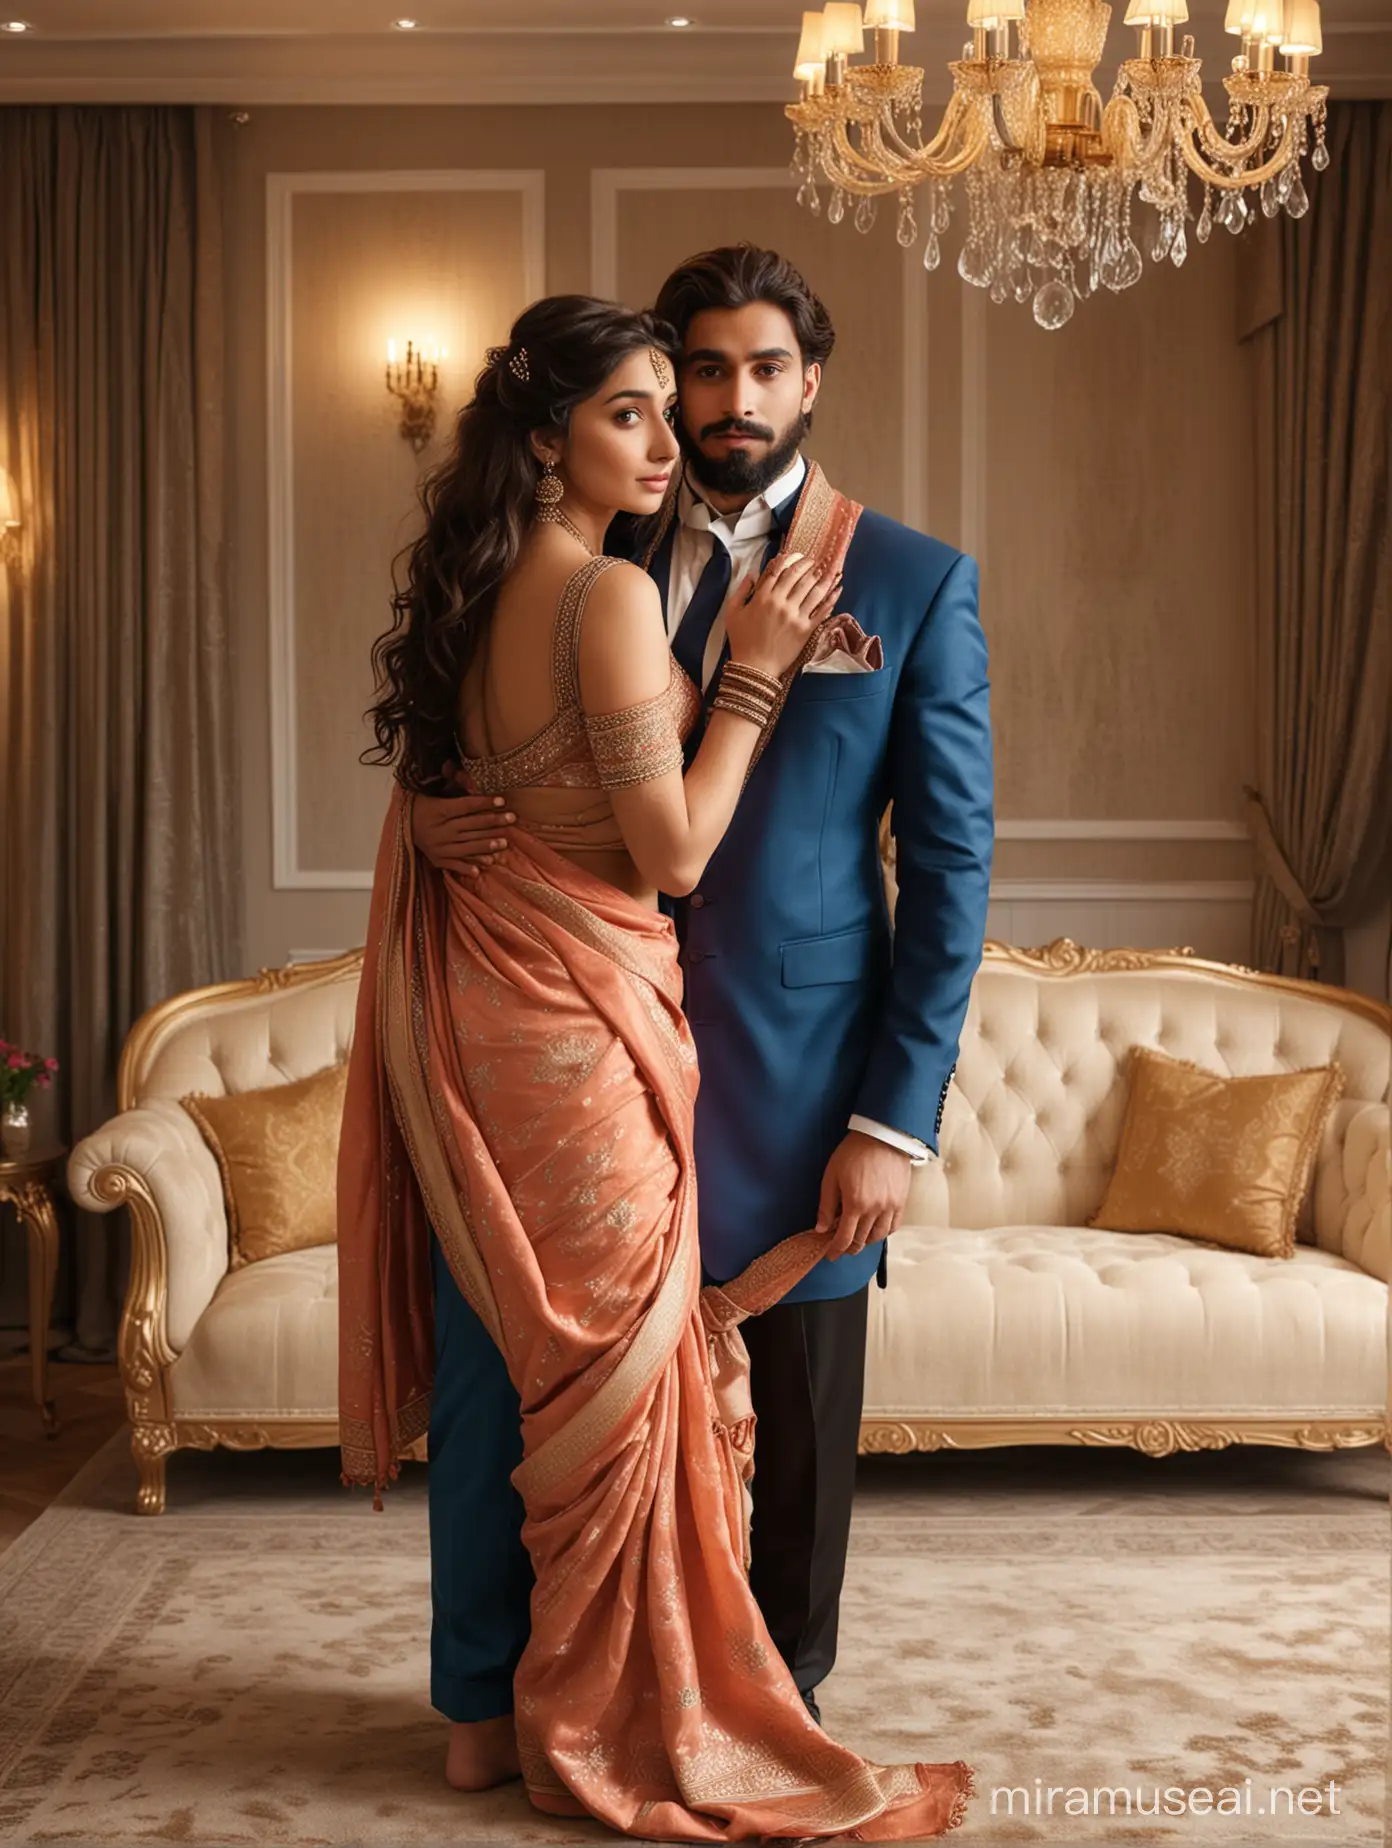 Emotional Embrace Indian Couple in Elegant Saree and Formals in Luxurious Room